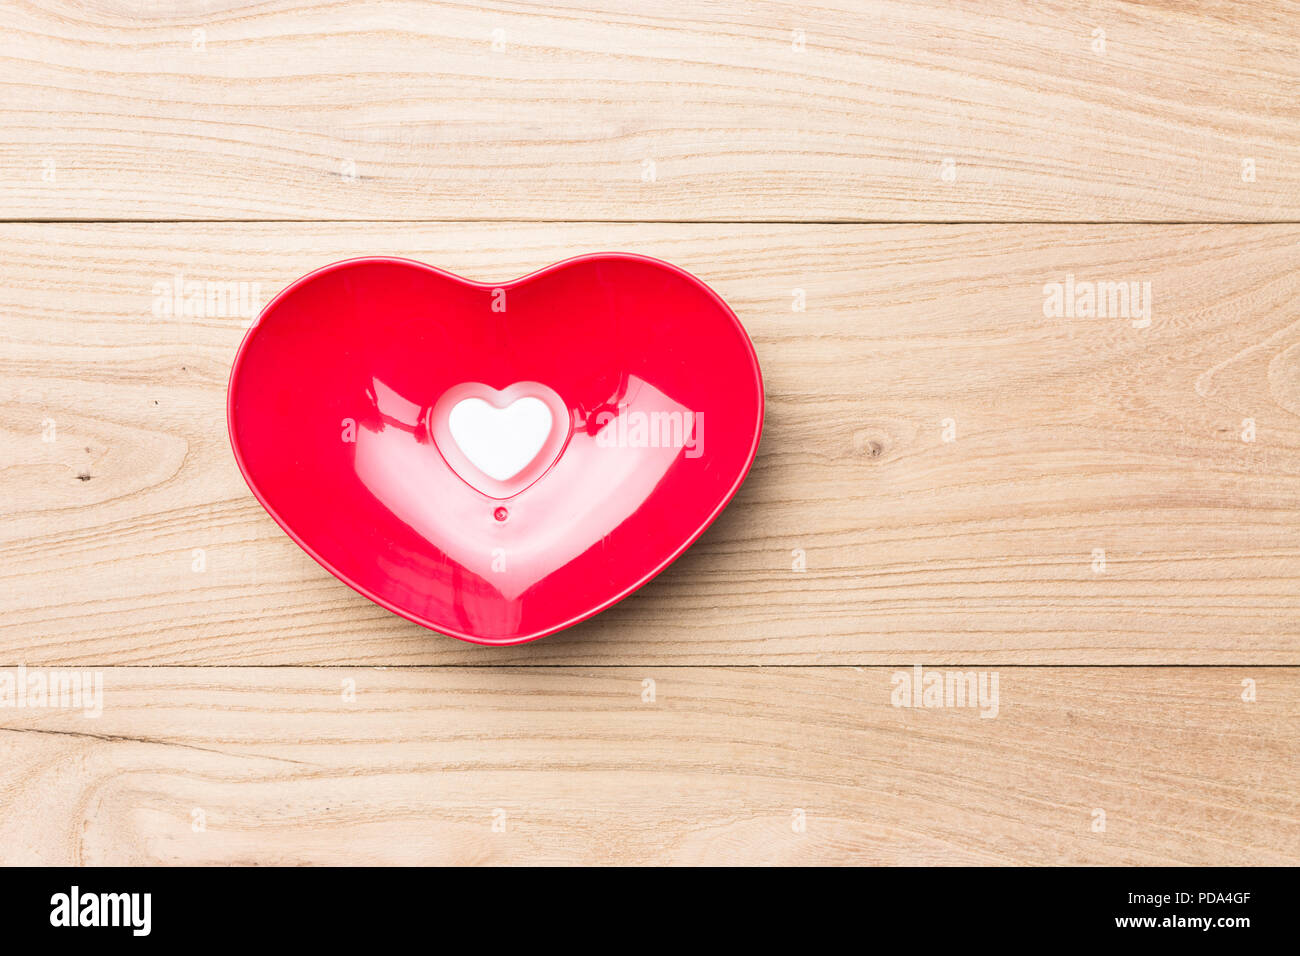 Heart shaped bowl in wood Stock Photo